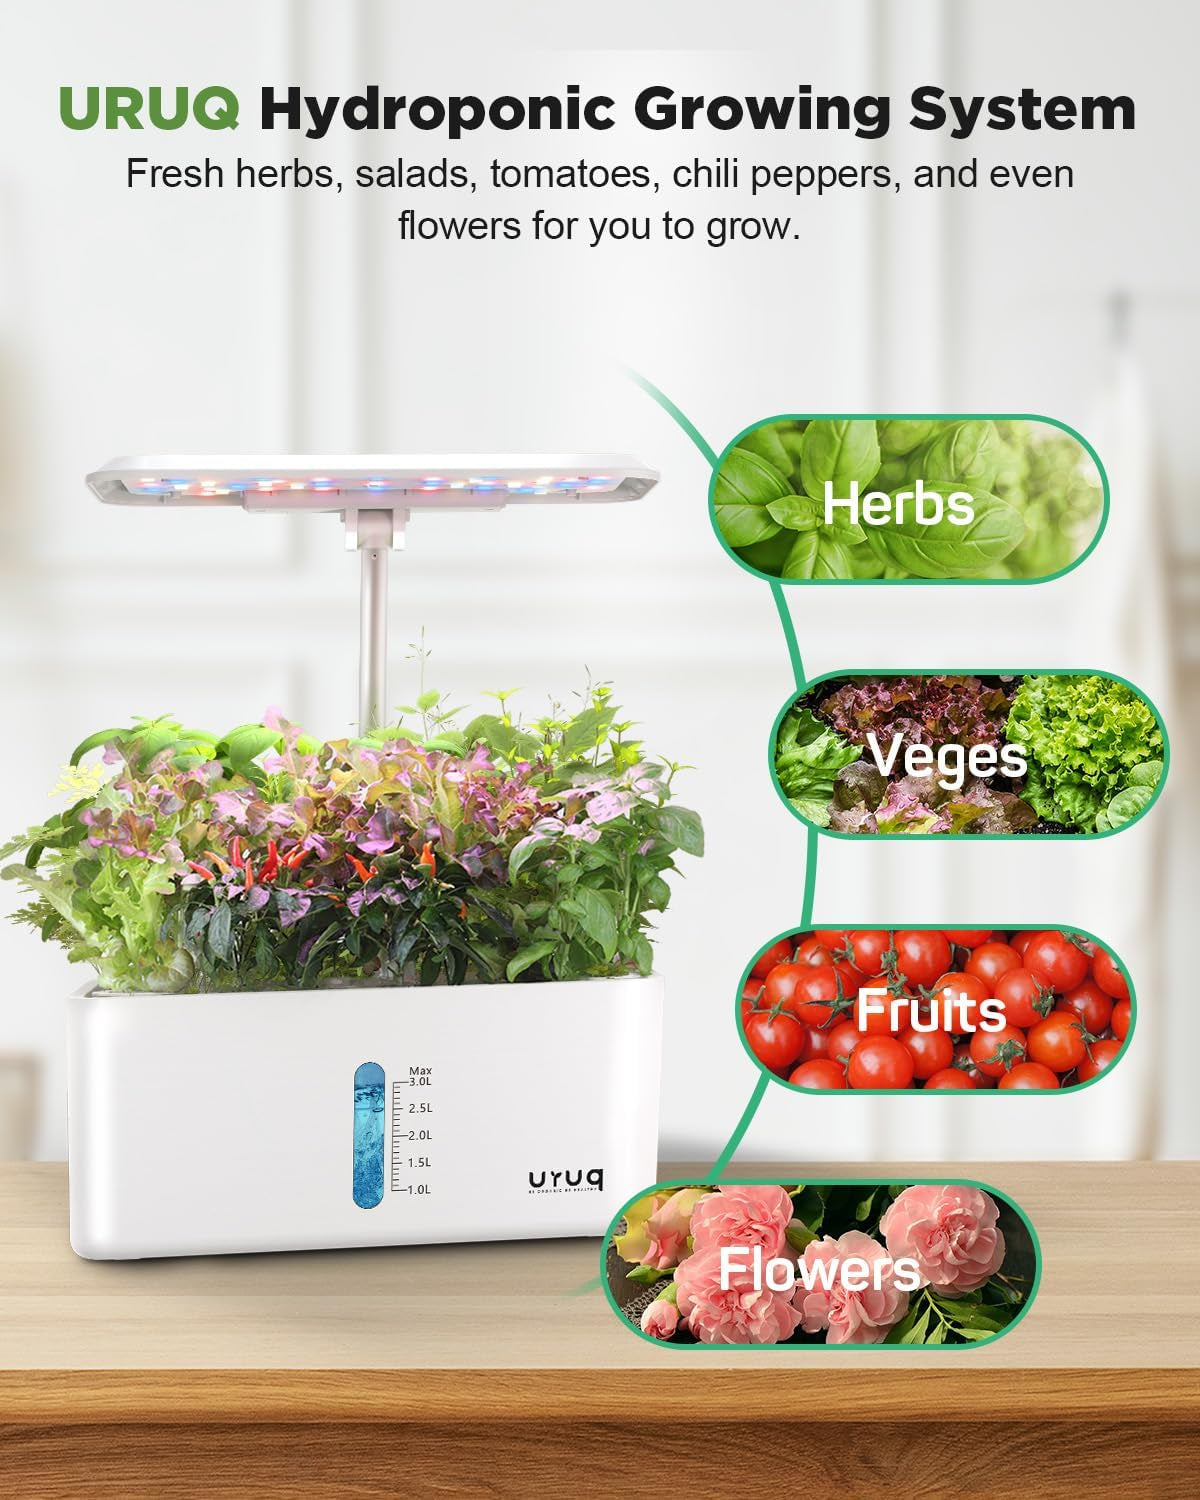 Hydroponics Growing System Indoor Garden: 8 Pods Herb Garden Kit Indoor with LED Grow Light Quiet Smart Water Pump Automatic Timer Healthy Fresh Herbs Vegetables - Hydroponic Planter for Home Kitchen